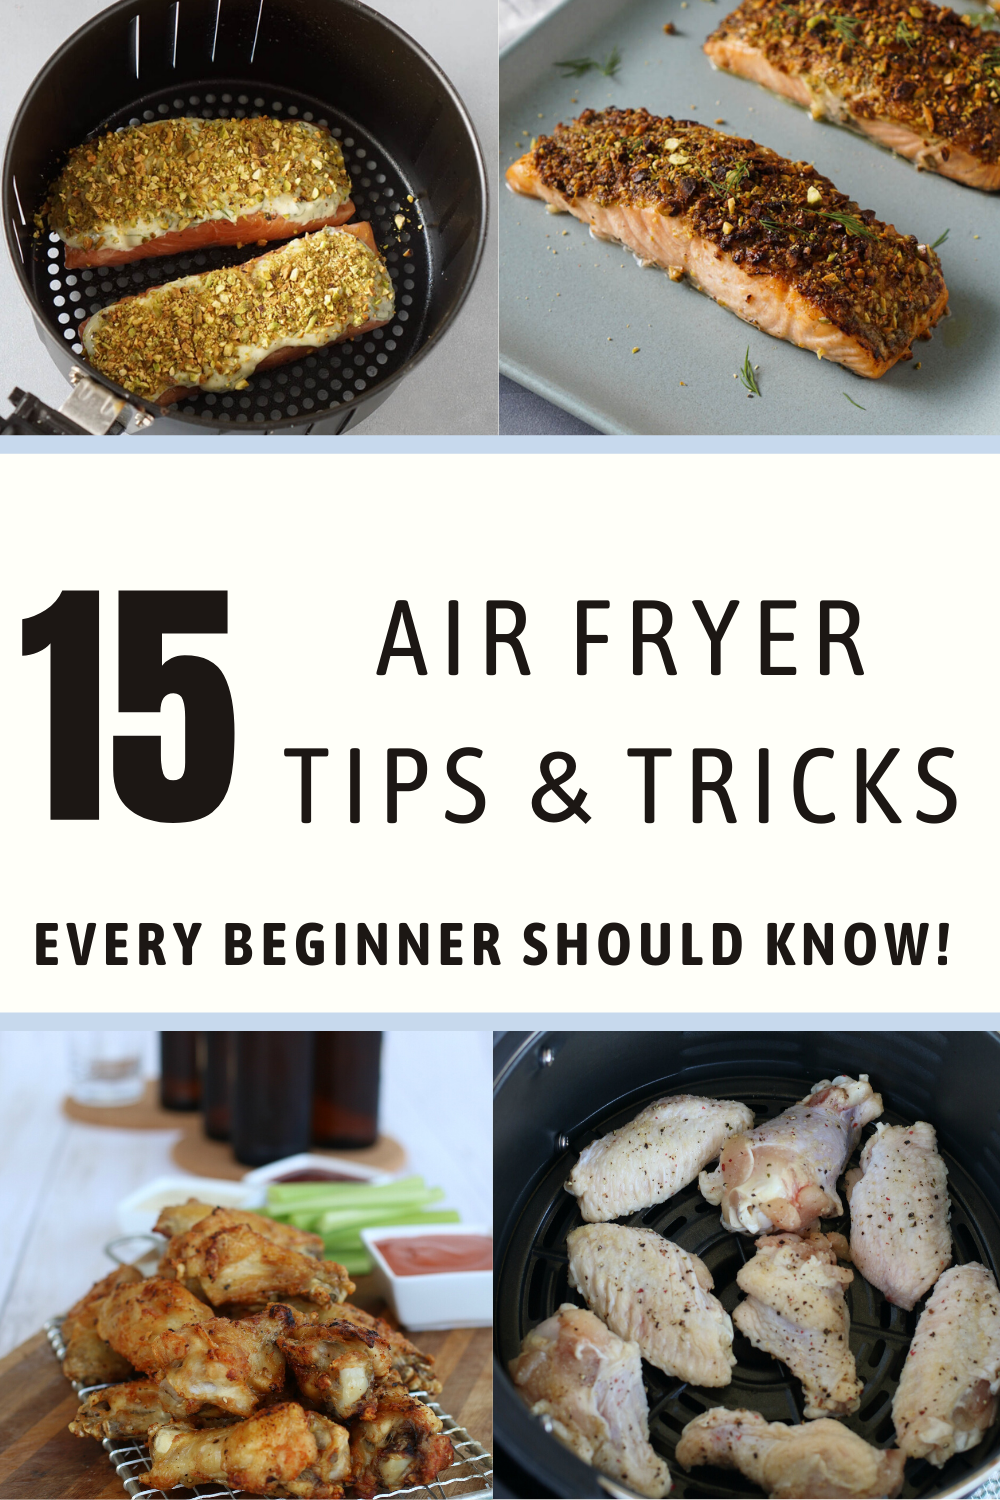 15 Helpful Tips For Anyone Who Owns An Air Fryer